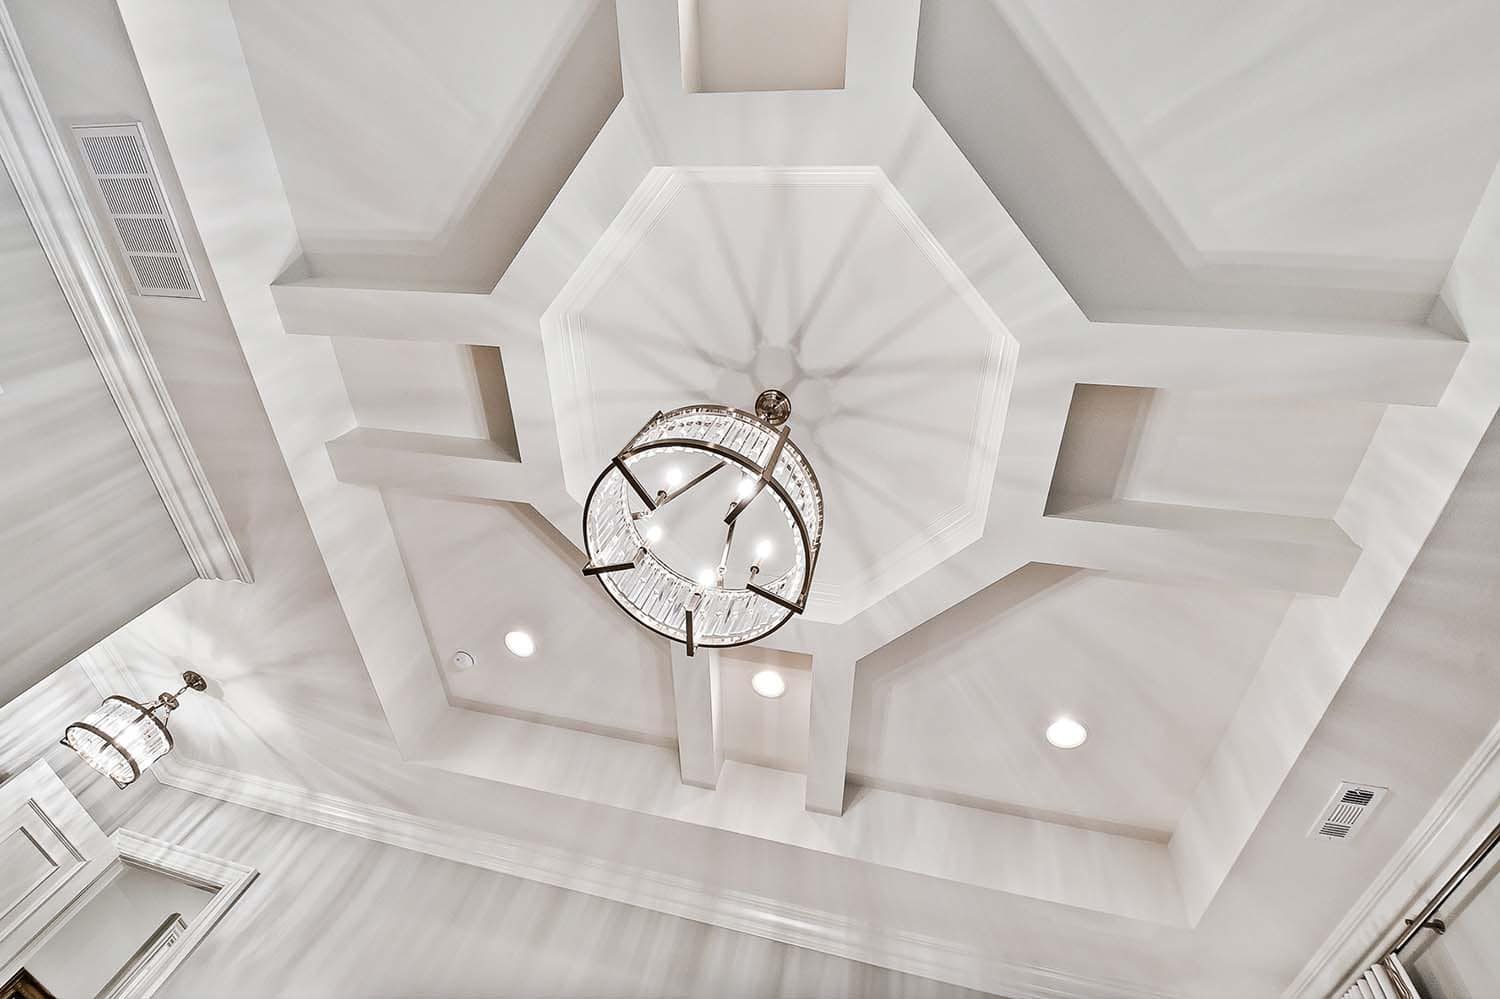 transitional style bedroom ceiling detail